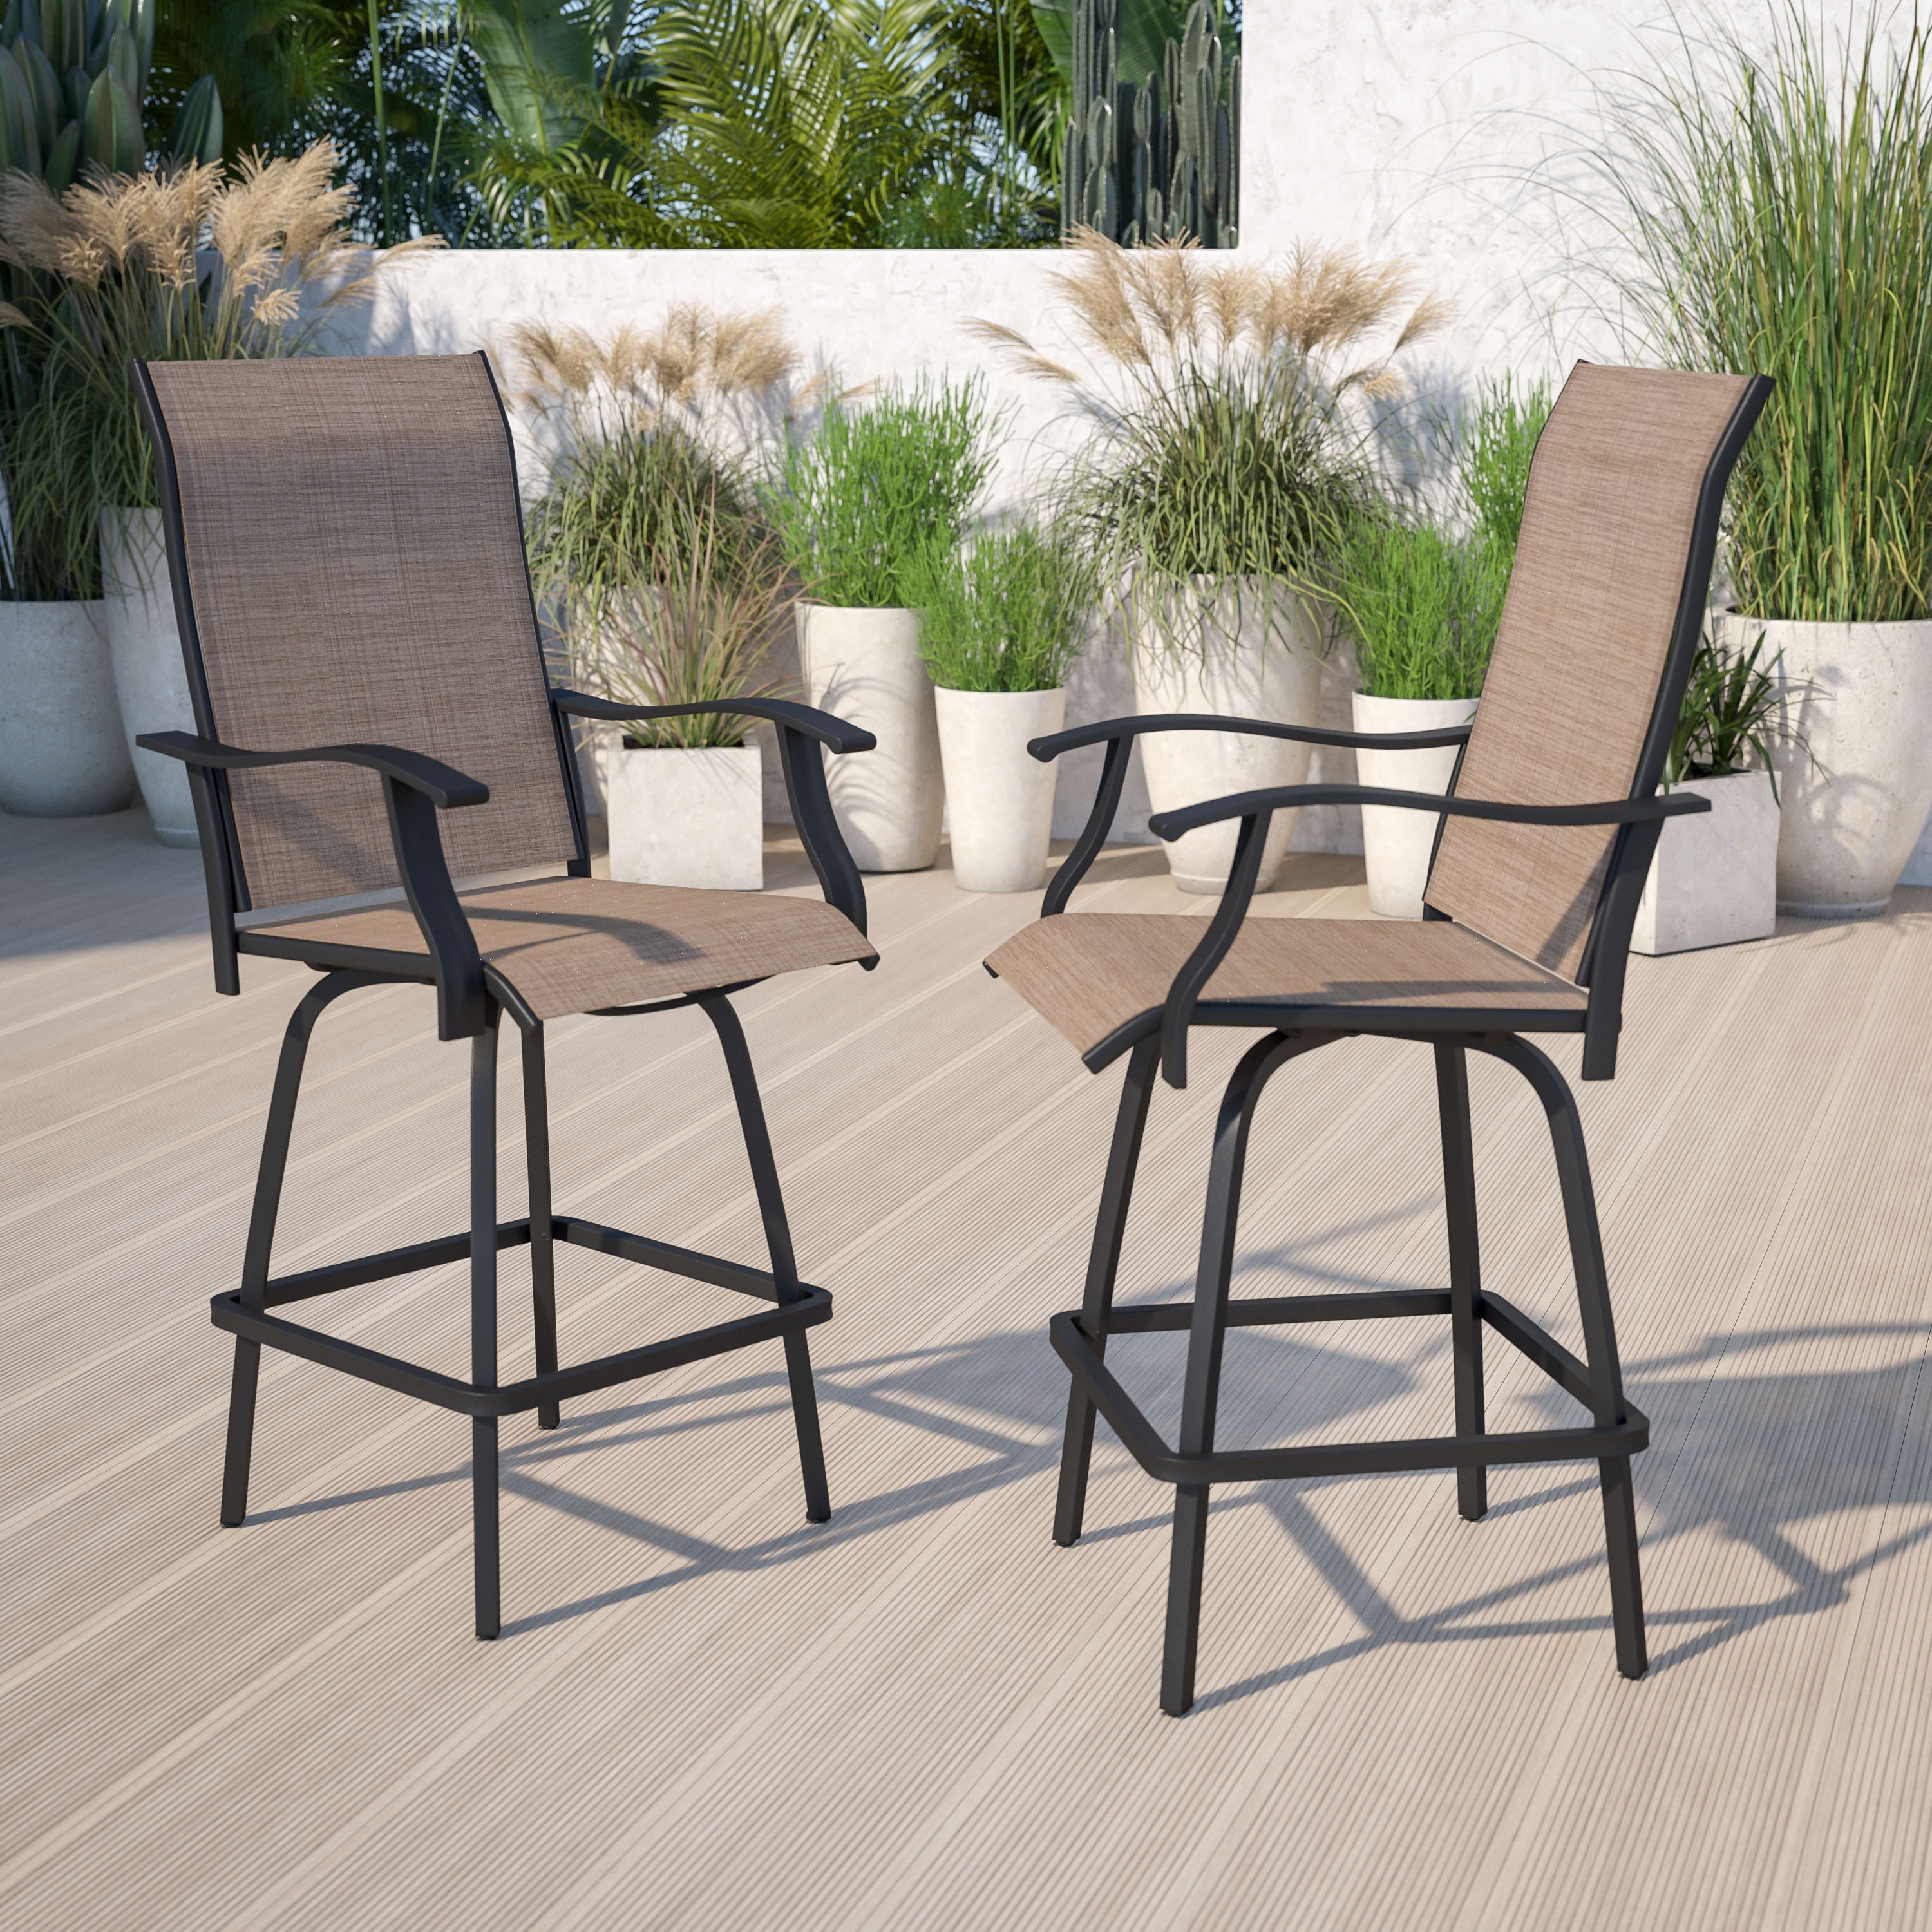 Outdoor Patio Bistro High Chairs Furniture with Armrest 2pcs Bar Stools Brown 